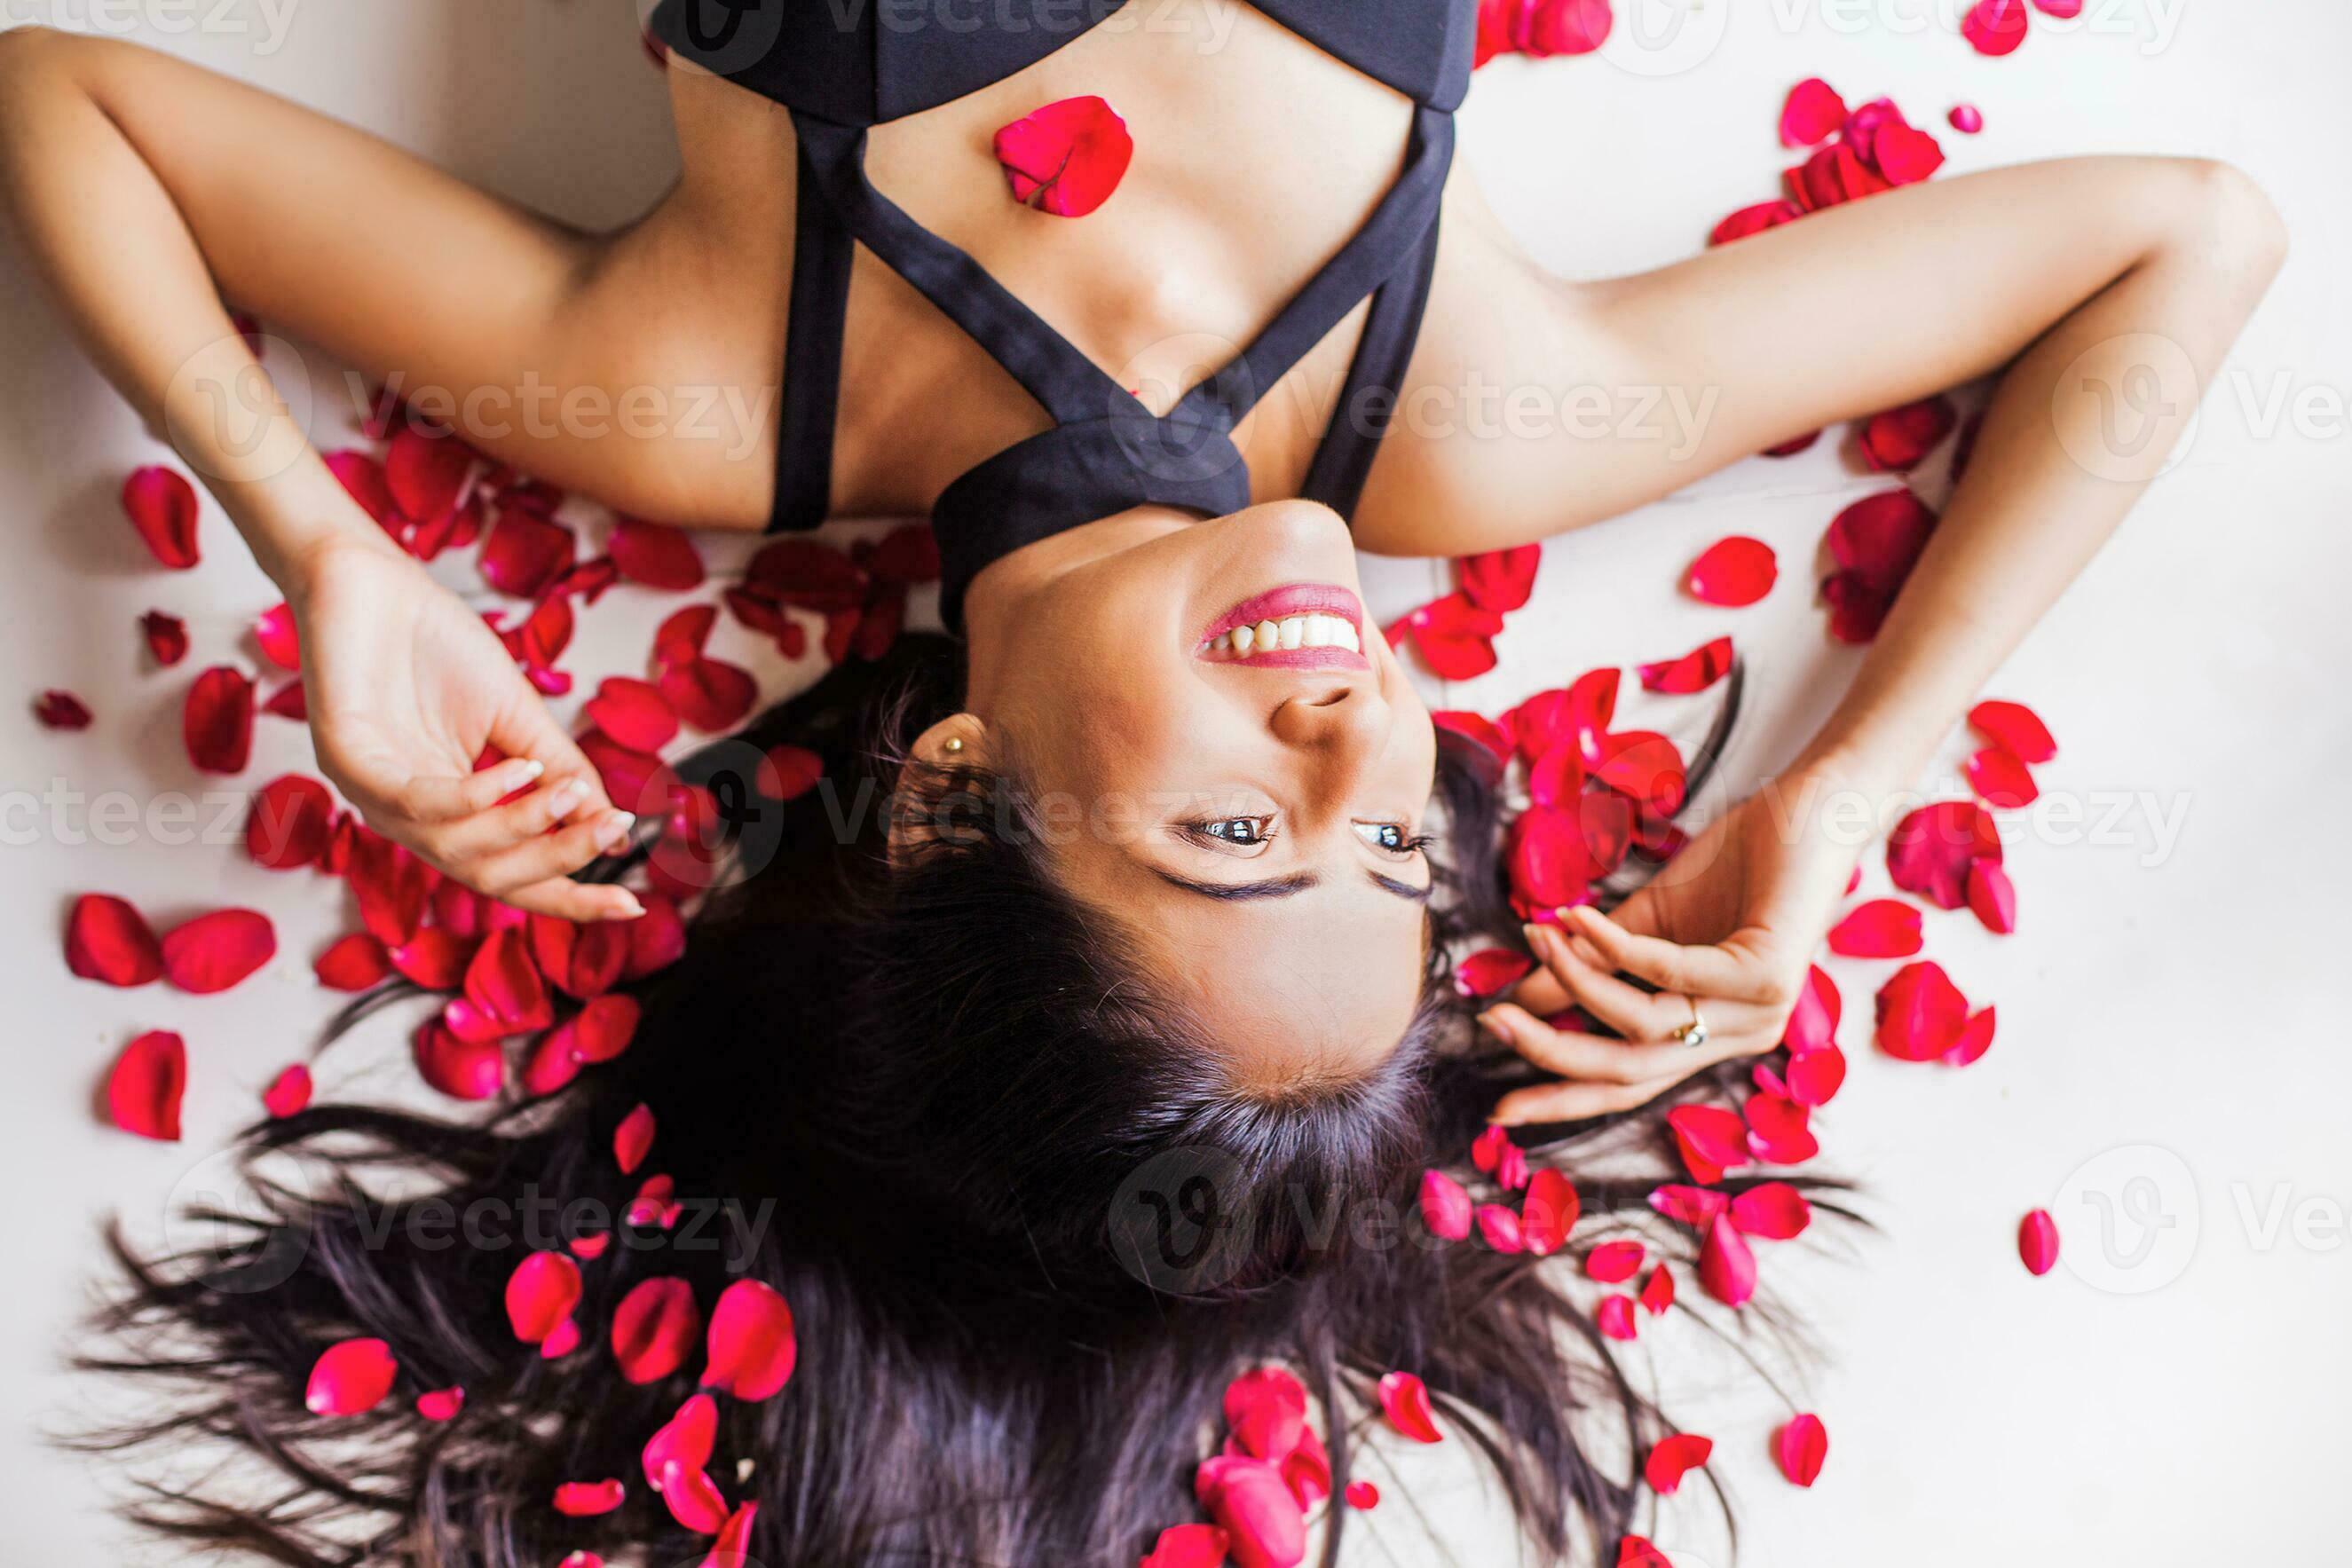 A beautiful smiling Indian woman with her untied hair wearing dress lying  on a bed scattered with red rose petals 26415658 Stock Photo at Vecteezy